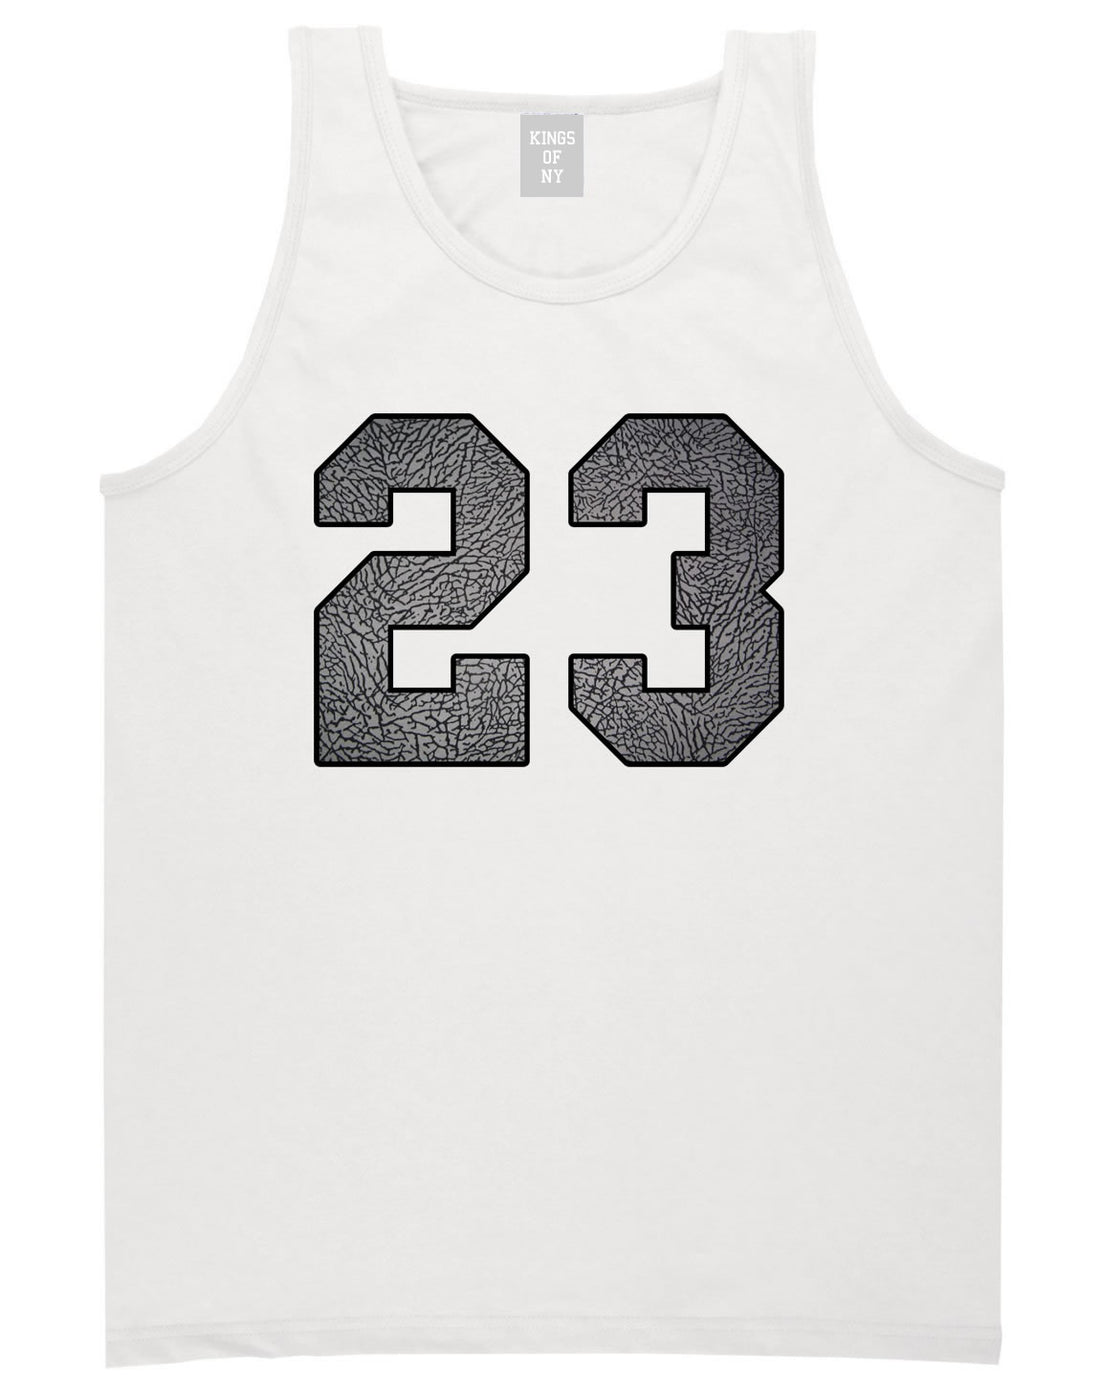 23 Cement Jersey Tank Top in White By Kings Of NY